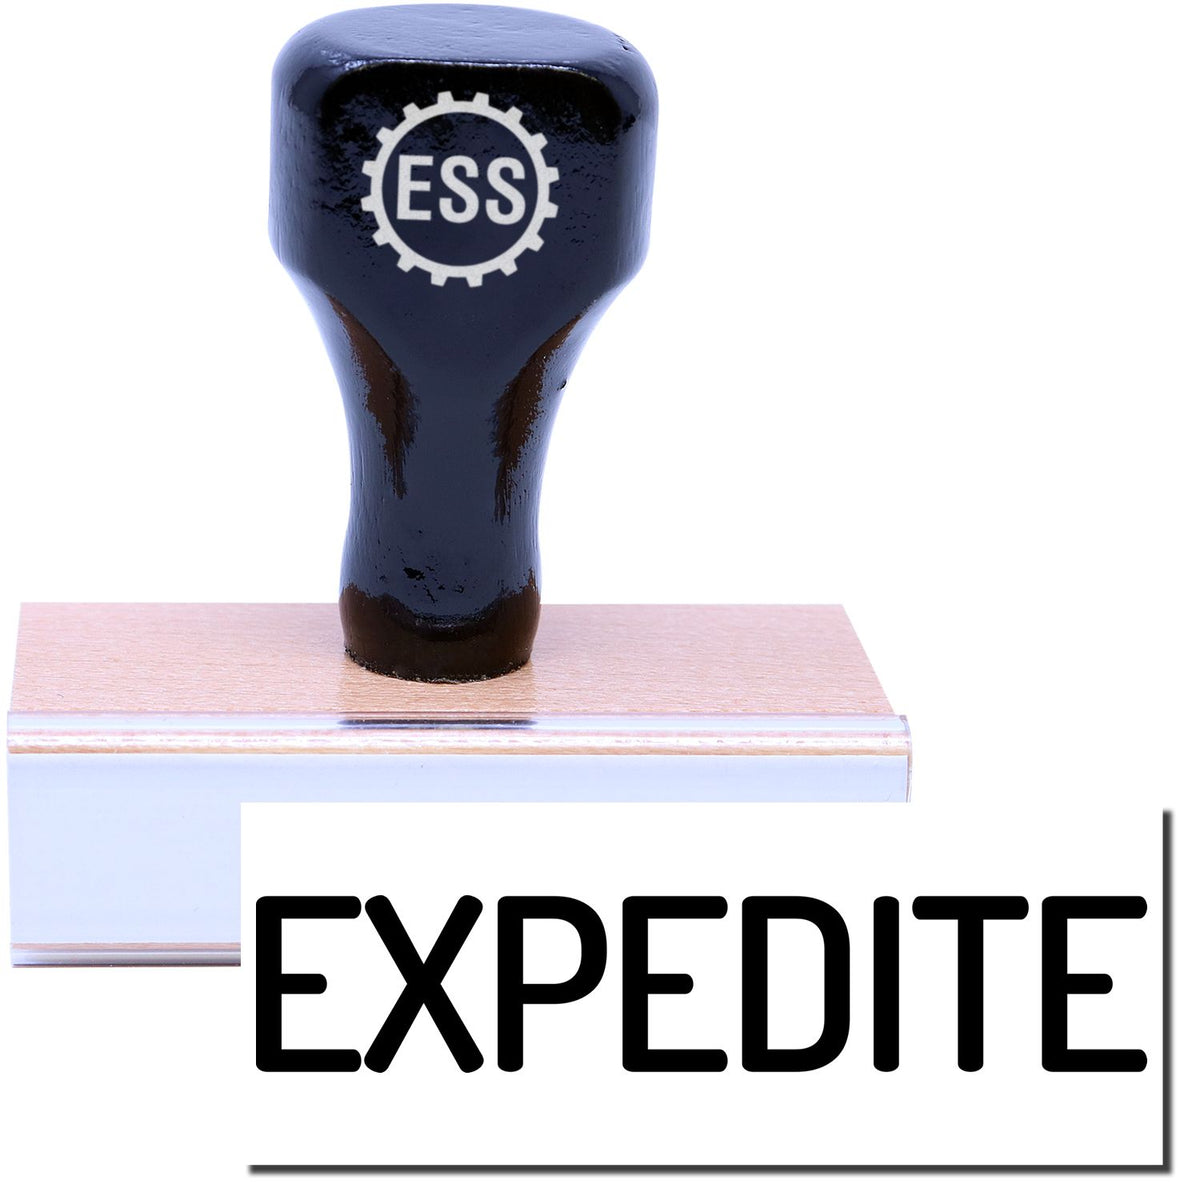 A stock office rubber stamp with a stamped image showing how the text &quot;EXPEDITE&quot; in a large narrow font is displayed after stamping.